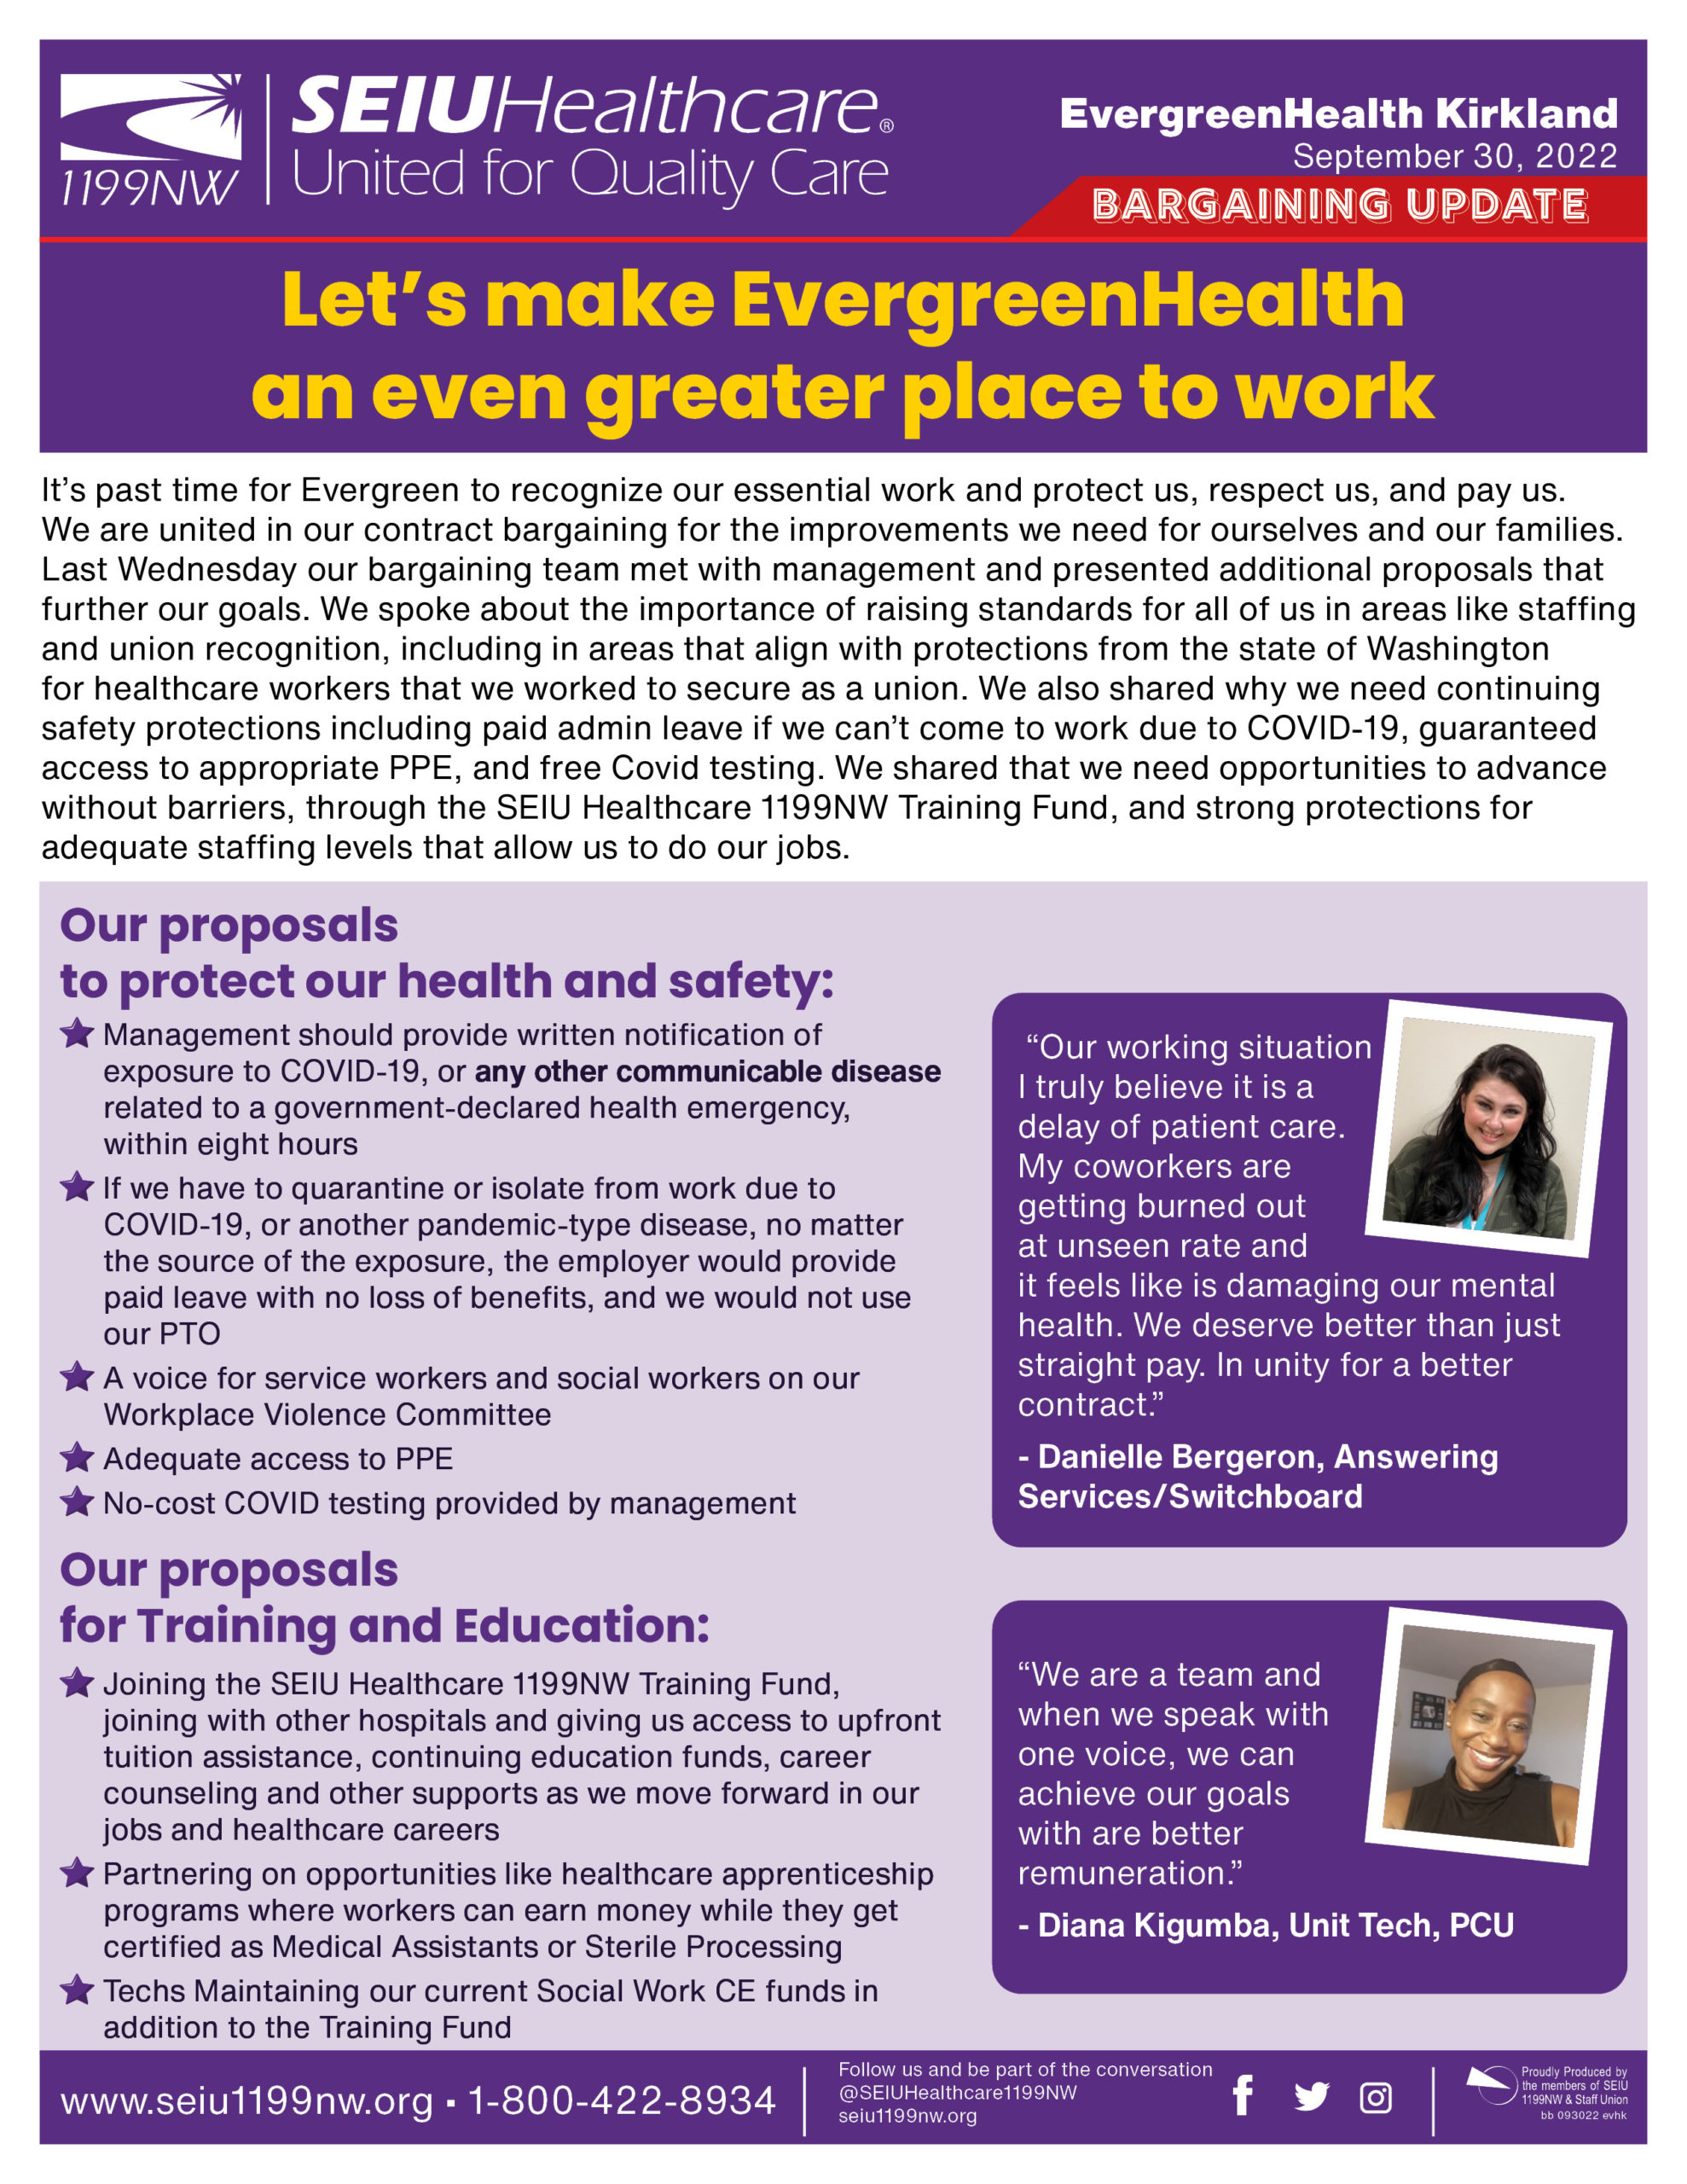 Let’s make EvergreenHealth an even greater place to work